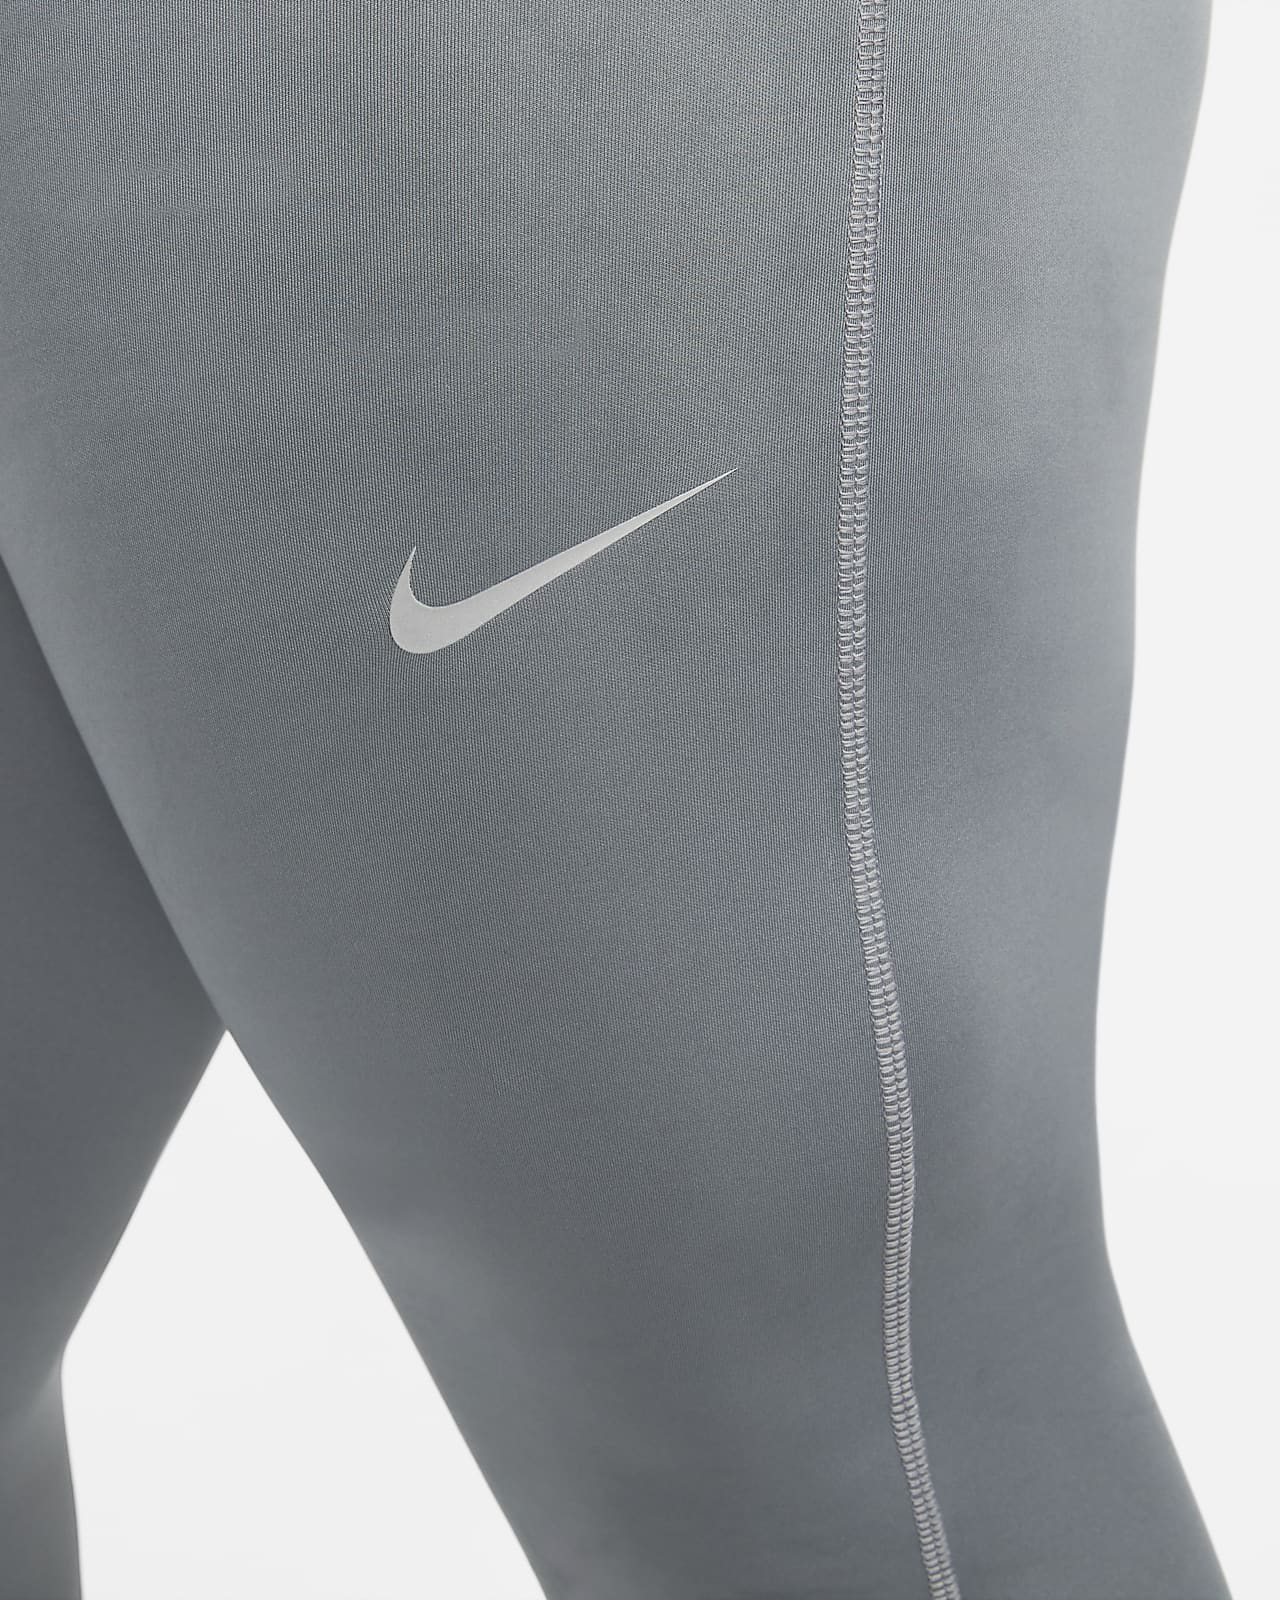 Nike Dri-Fit Challenger Tight - Men's - Clothing